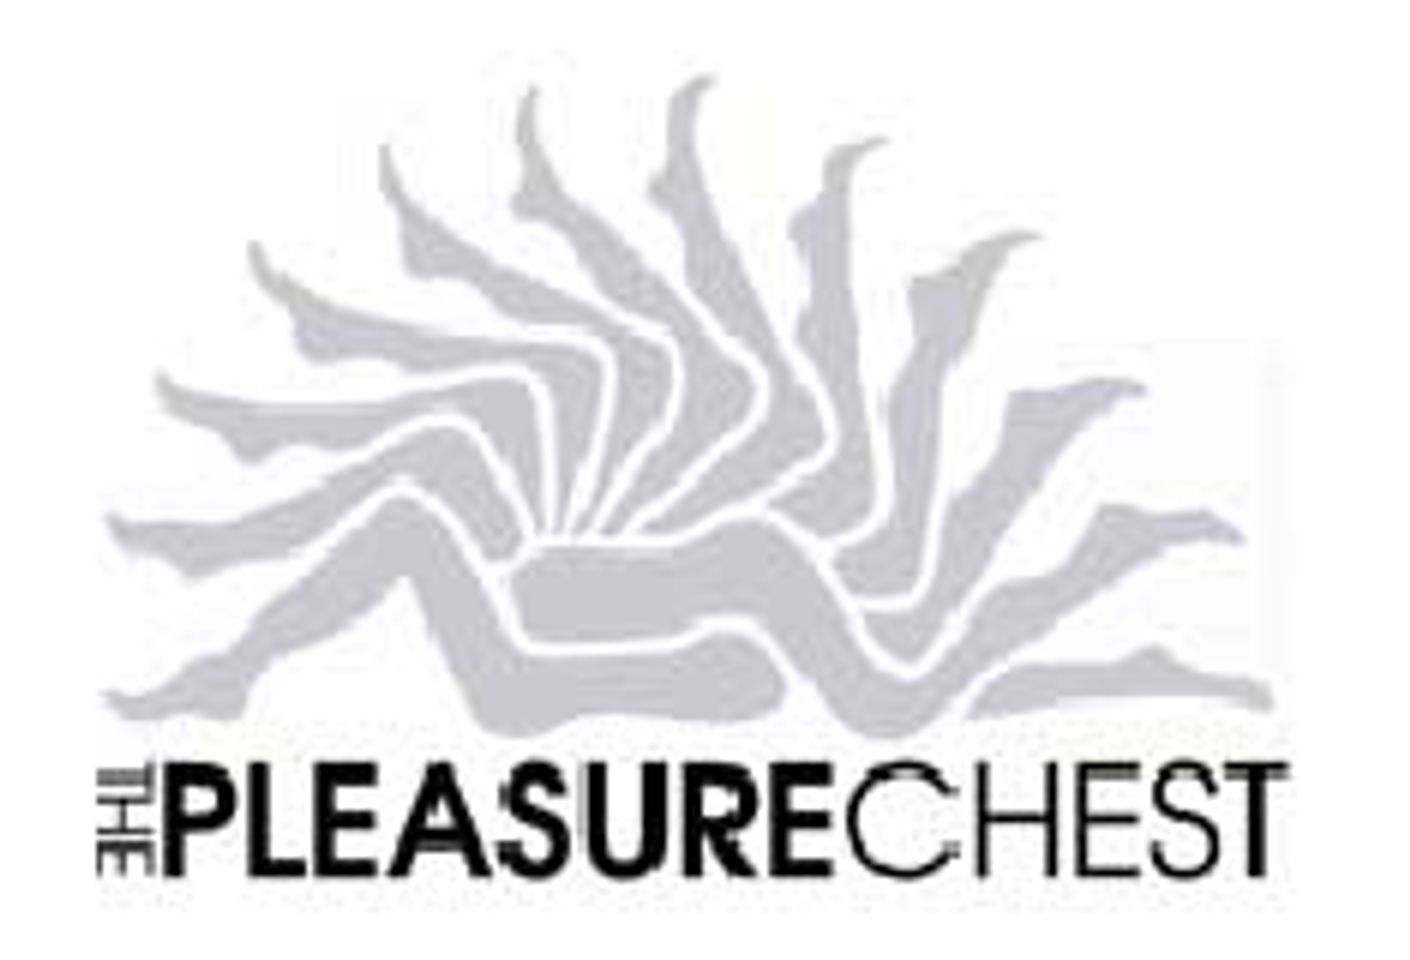 The Pleasure Chest Sponsoring ‘Fifty Shades’ Screenings